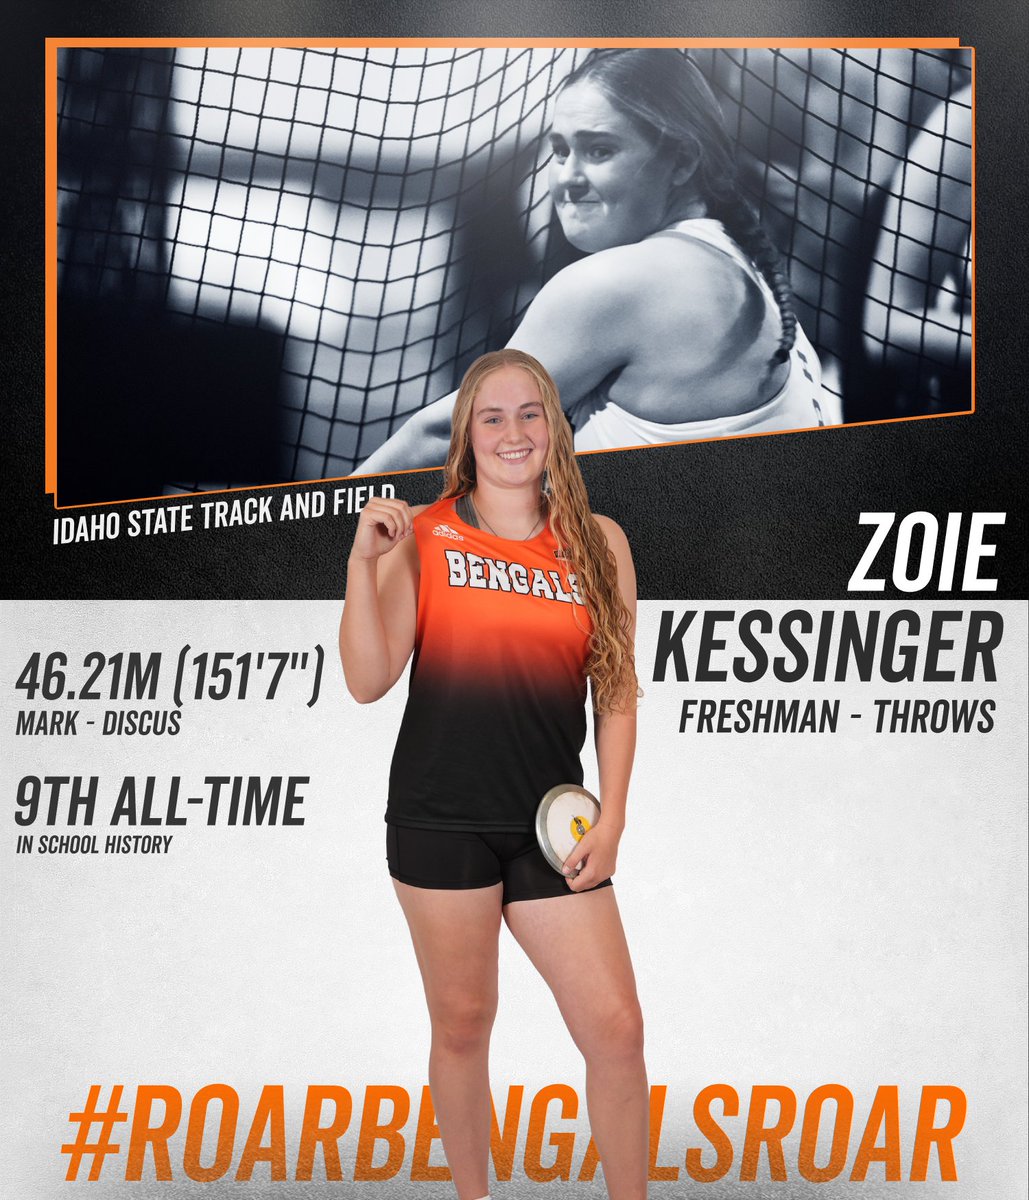 We've got another freshman Top-10!🔥

Zoie Kessinger had a PR of 46.21m (151'7') in the discus at Davis Field, 9th all-time in the outdoor record books!👏

#RoarBengalsRoar #NCAATF #OutdoorSeason